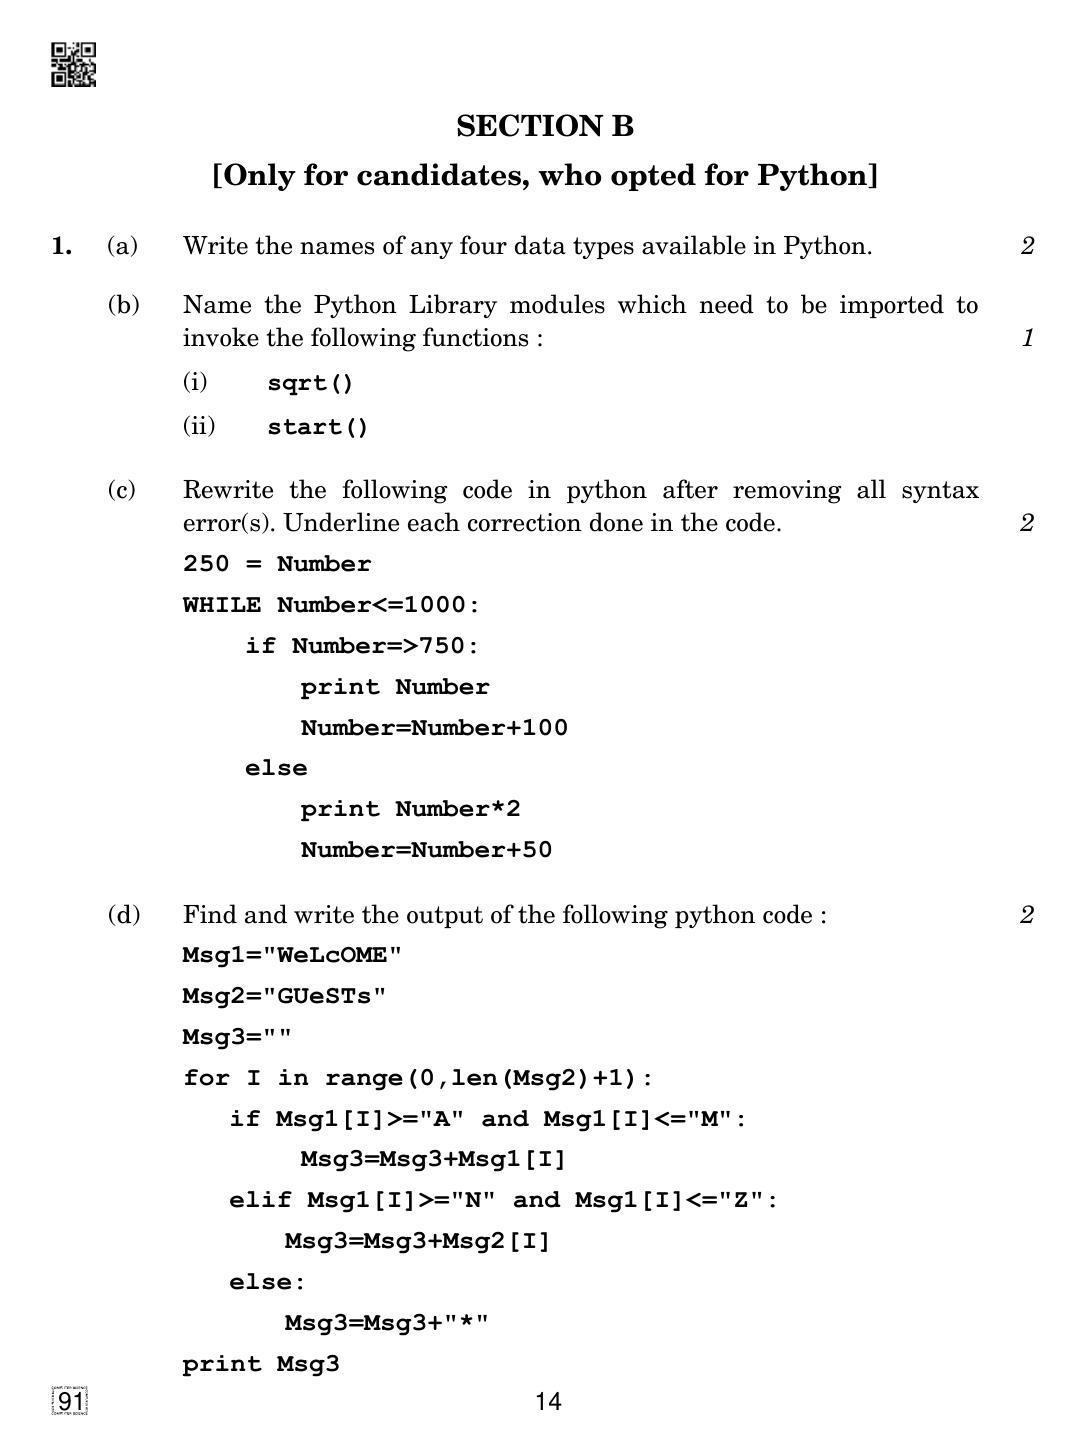 CBSE Class 12 91 Computer Science 2019 Question Paper - Page 14